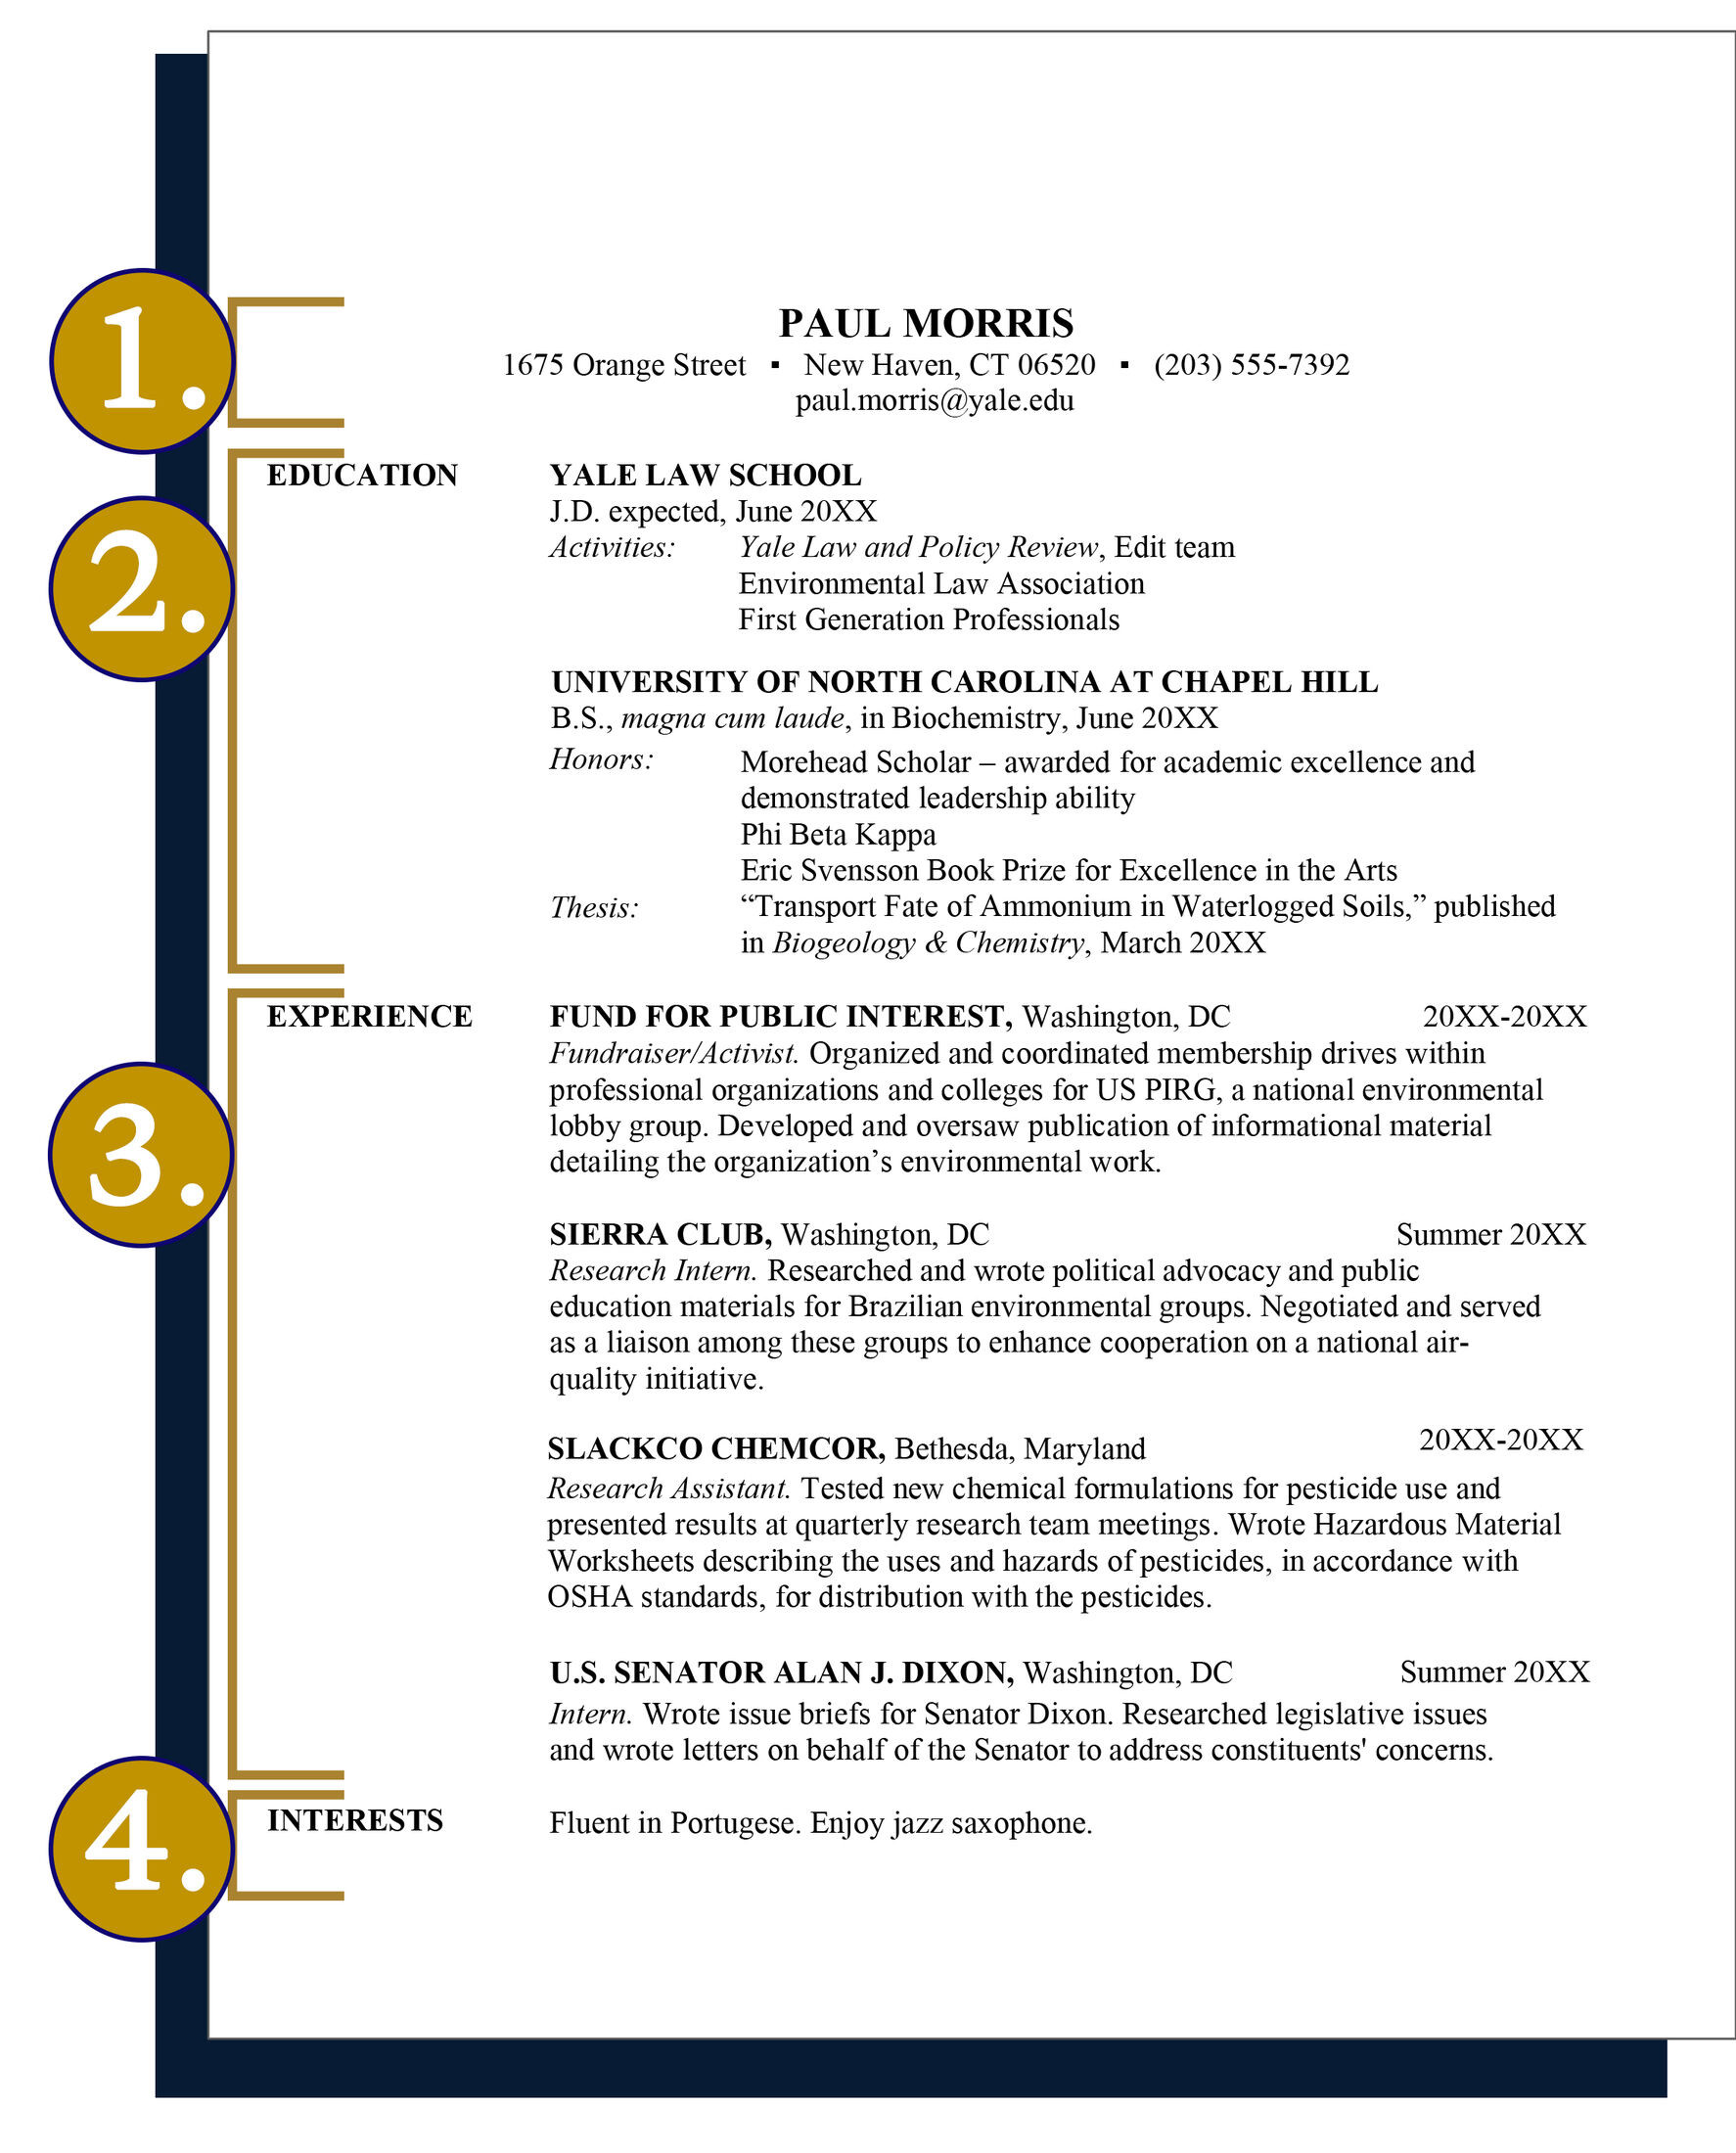 Sample Resume for Undergraduate Admission Ivy League Resume Advice & Samples – Yale Law School